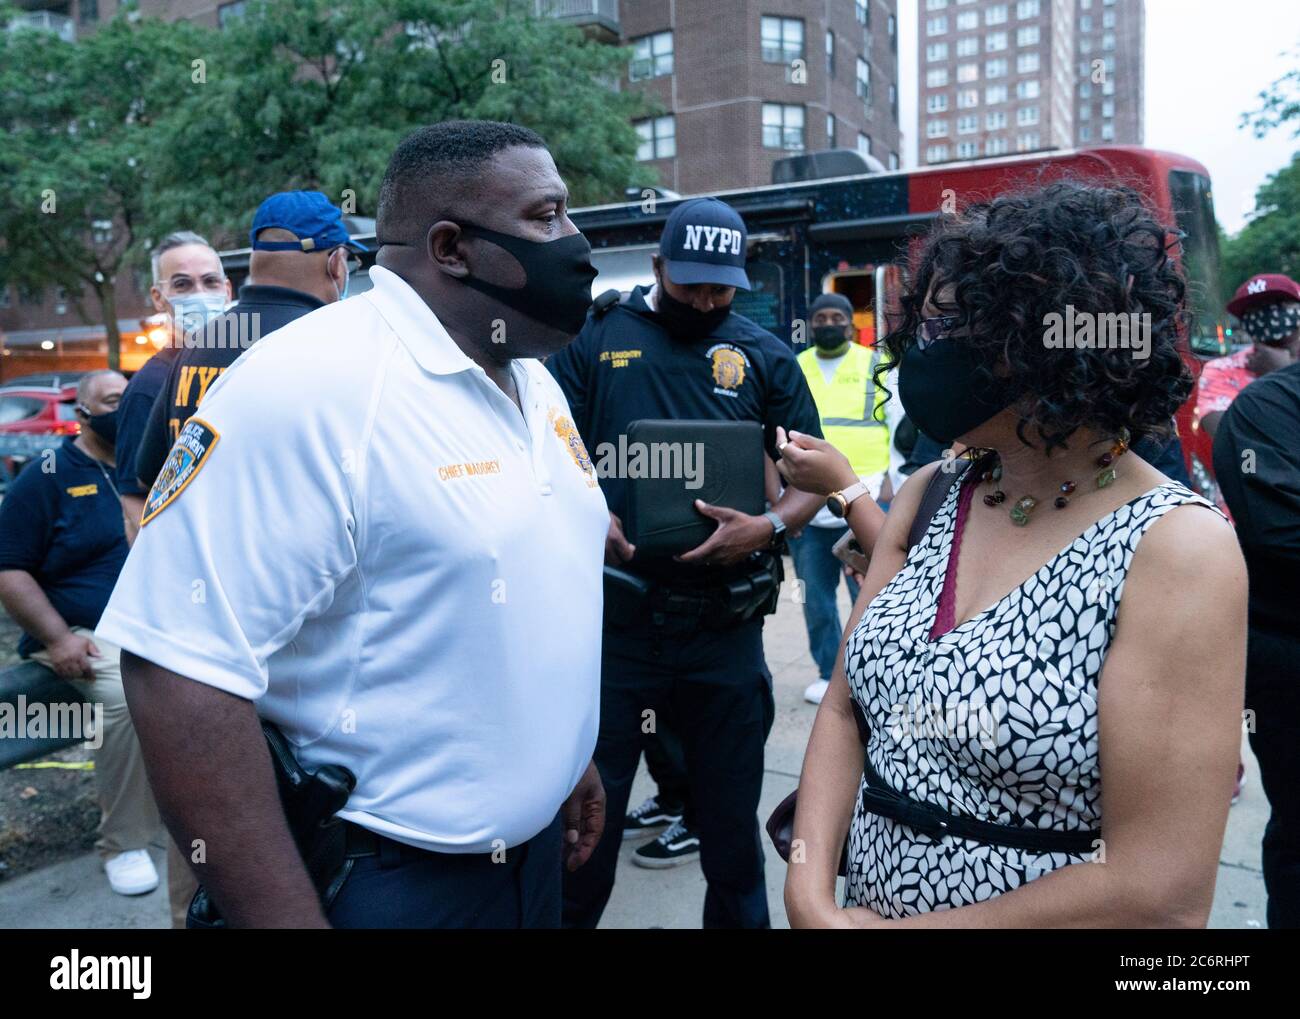 New York, NY - July 11, 2020: NYPD Chief Jeffrey Maddrey attends Occupy the Corner rally in East Harlem in response on gun violence Stock Photo